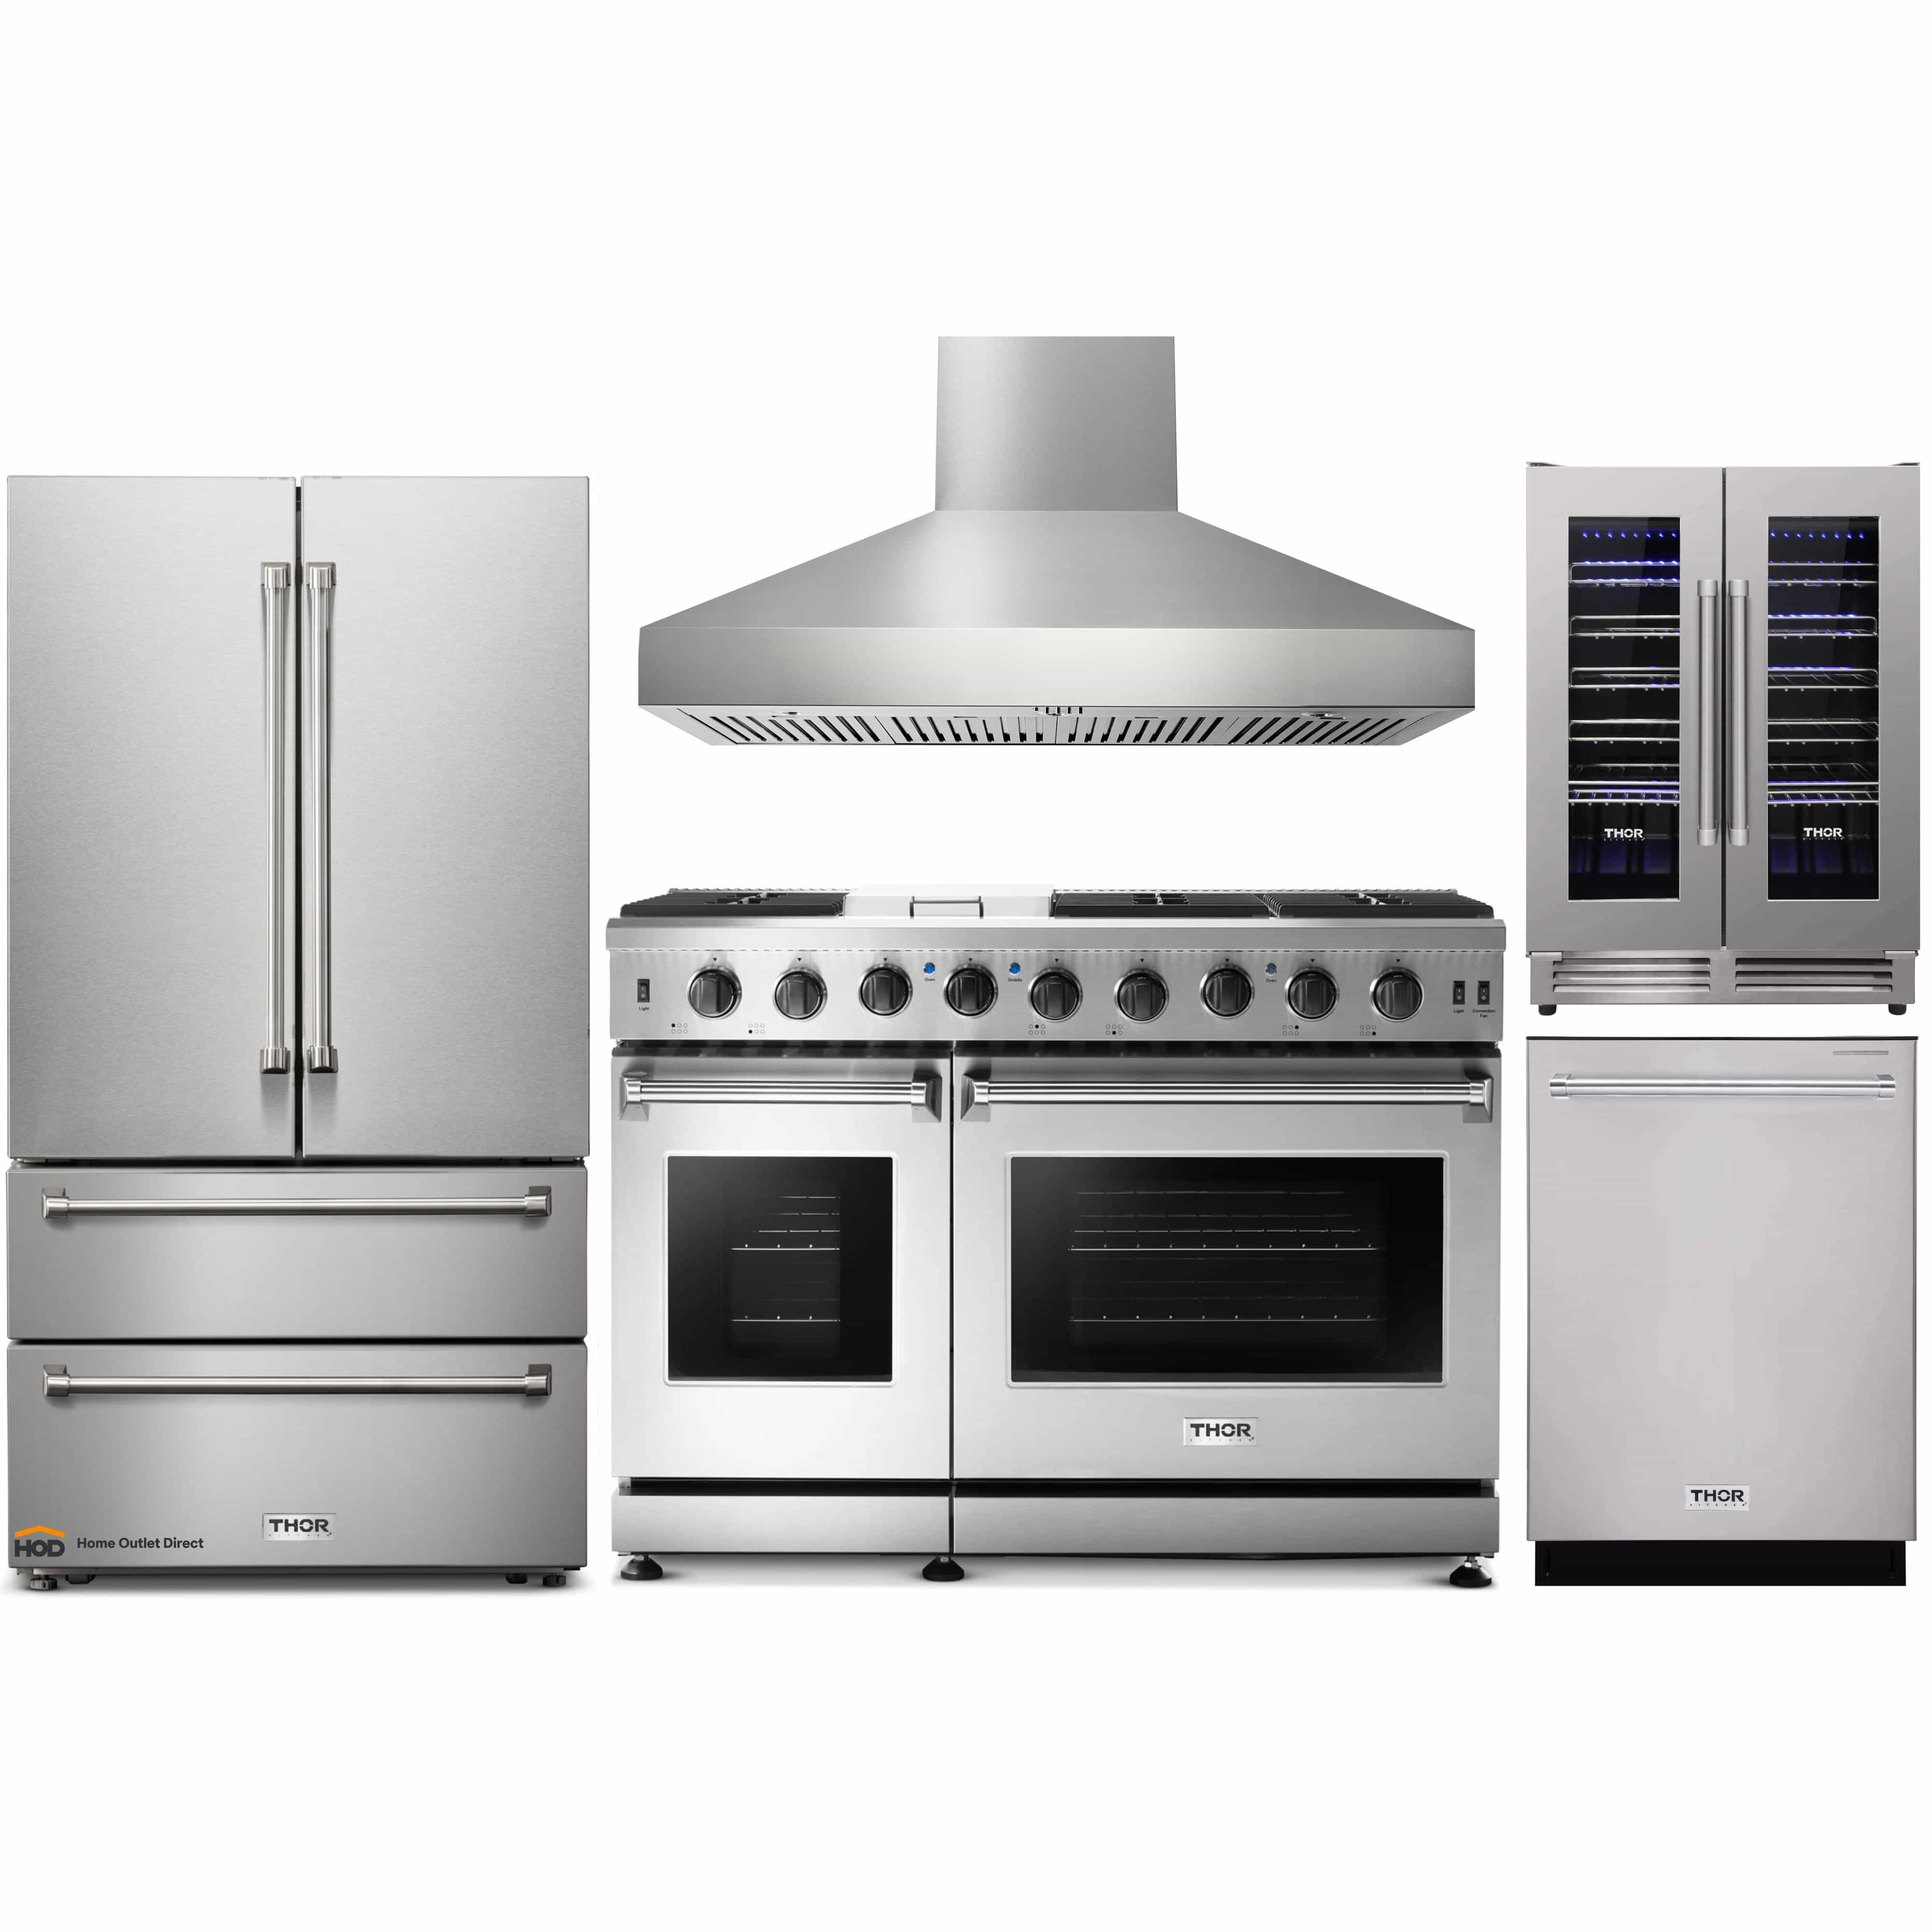 Thor Kitchen 5-Piece Appliance Package - 48-Inch Gas Range, French Door Refrigerator, Pro Wall Mount Hood, Dishwasher, and Wine Cooler in Stainless Steel